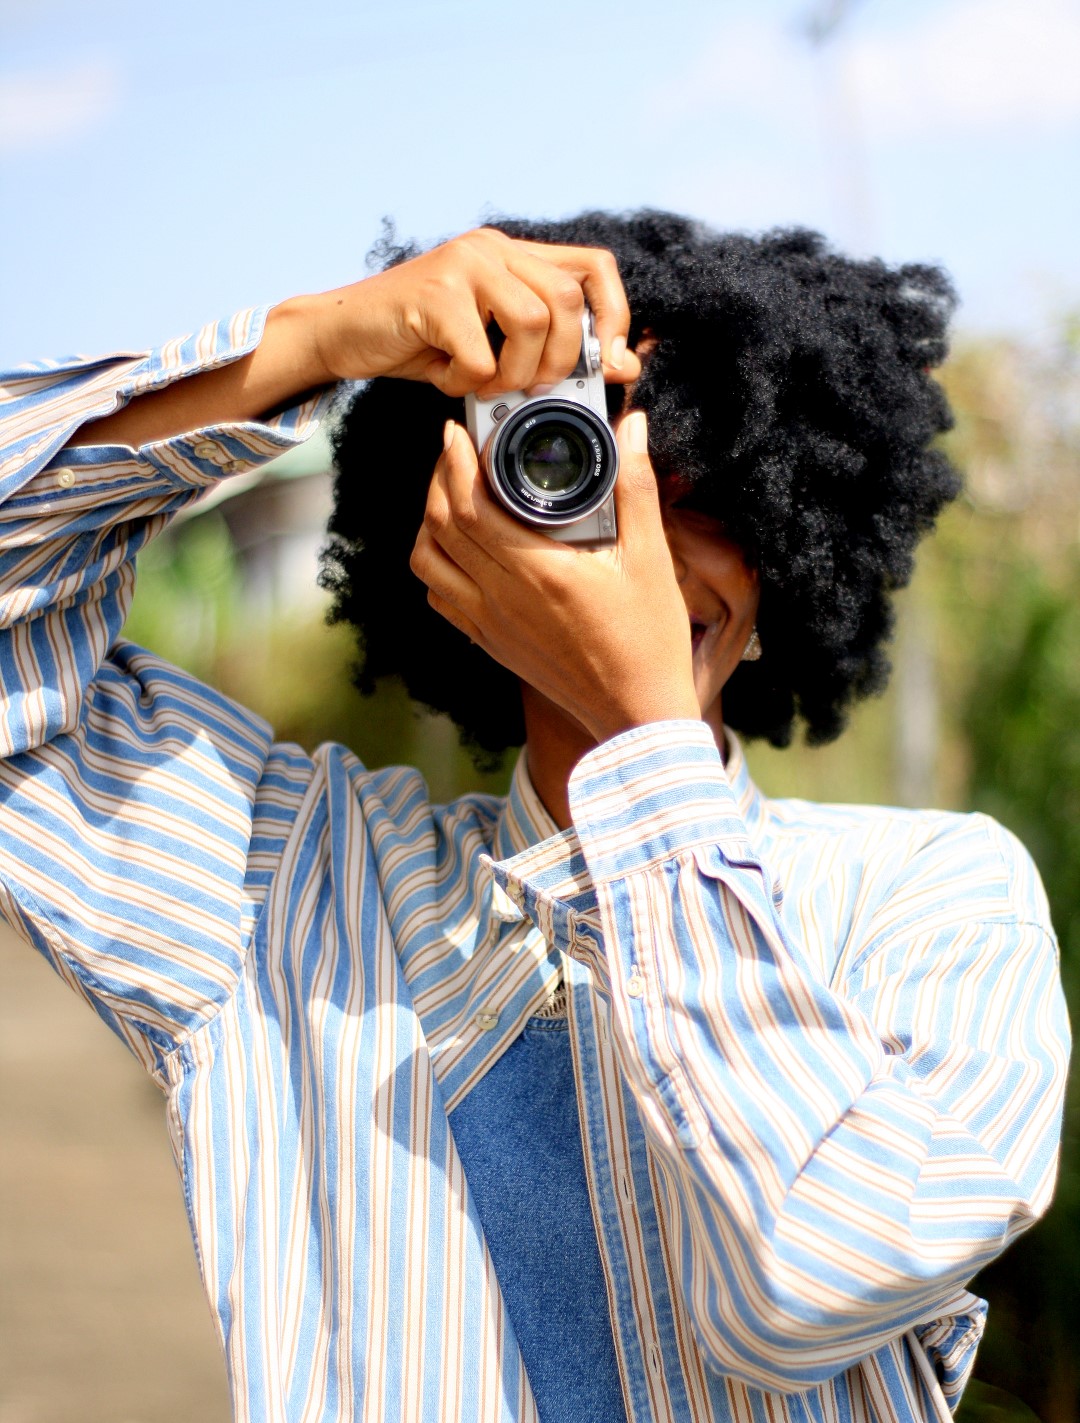 Sony A6000 Review, nigerian fashion blogger Cassie Daves holding a Sony A6000